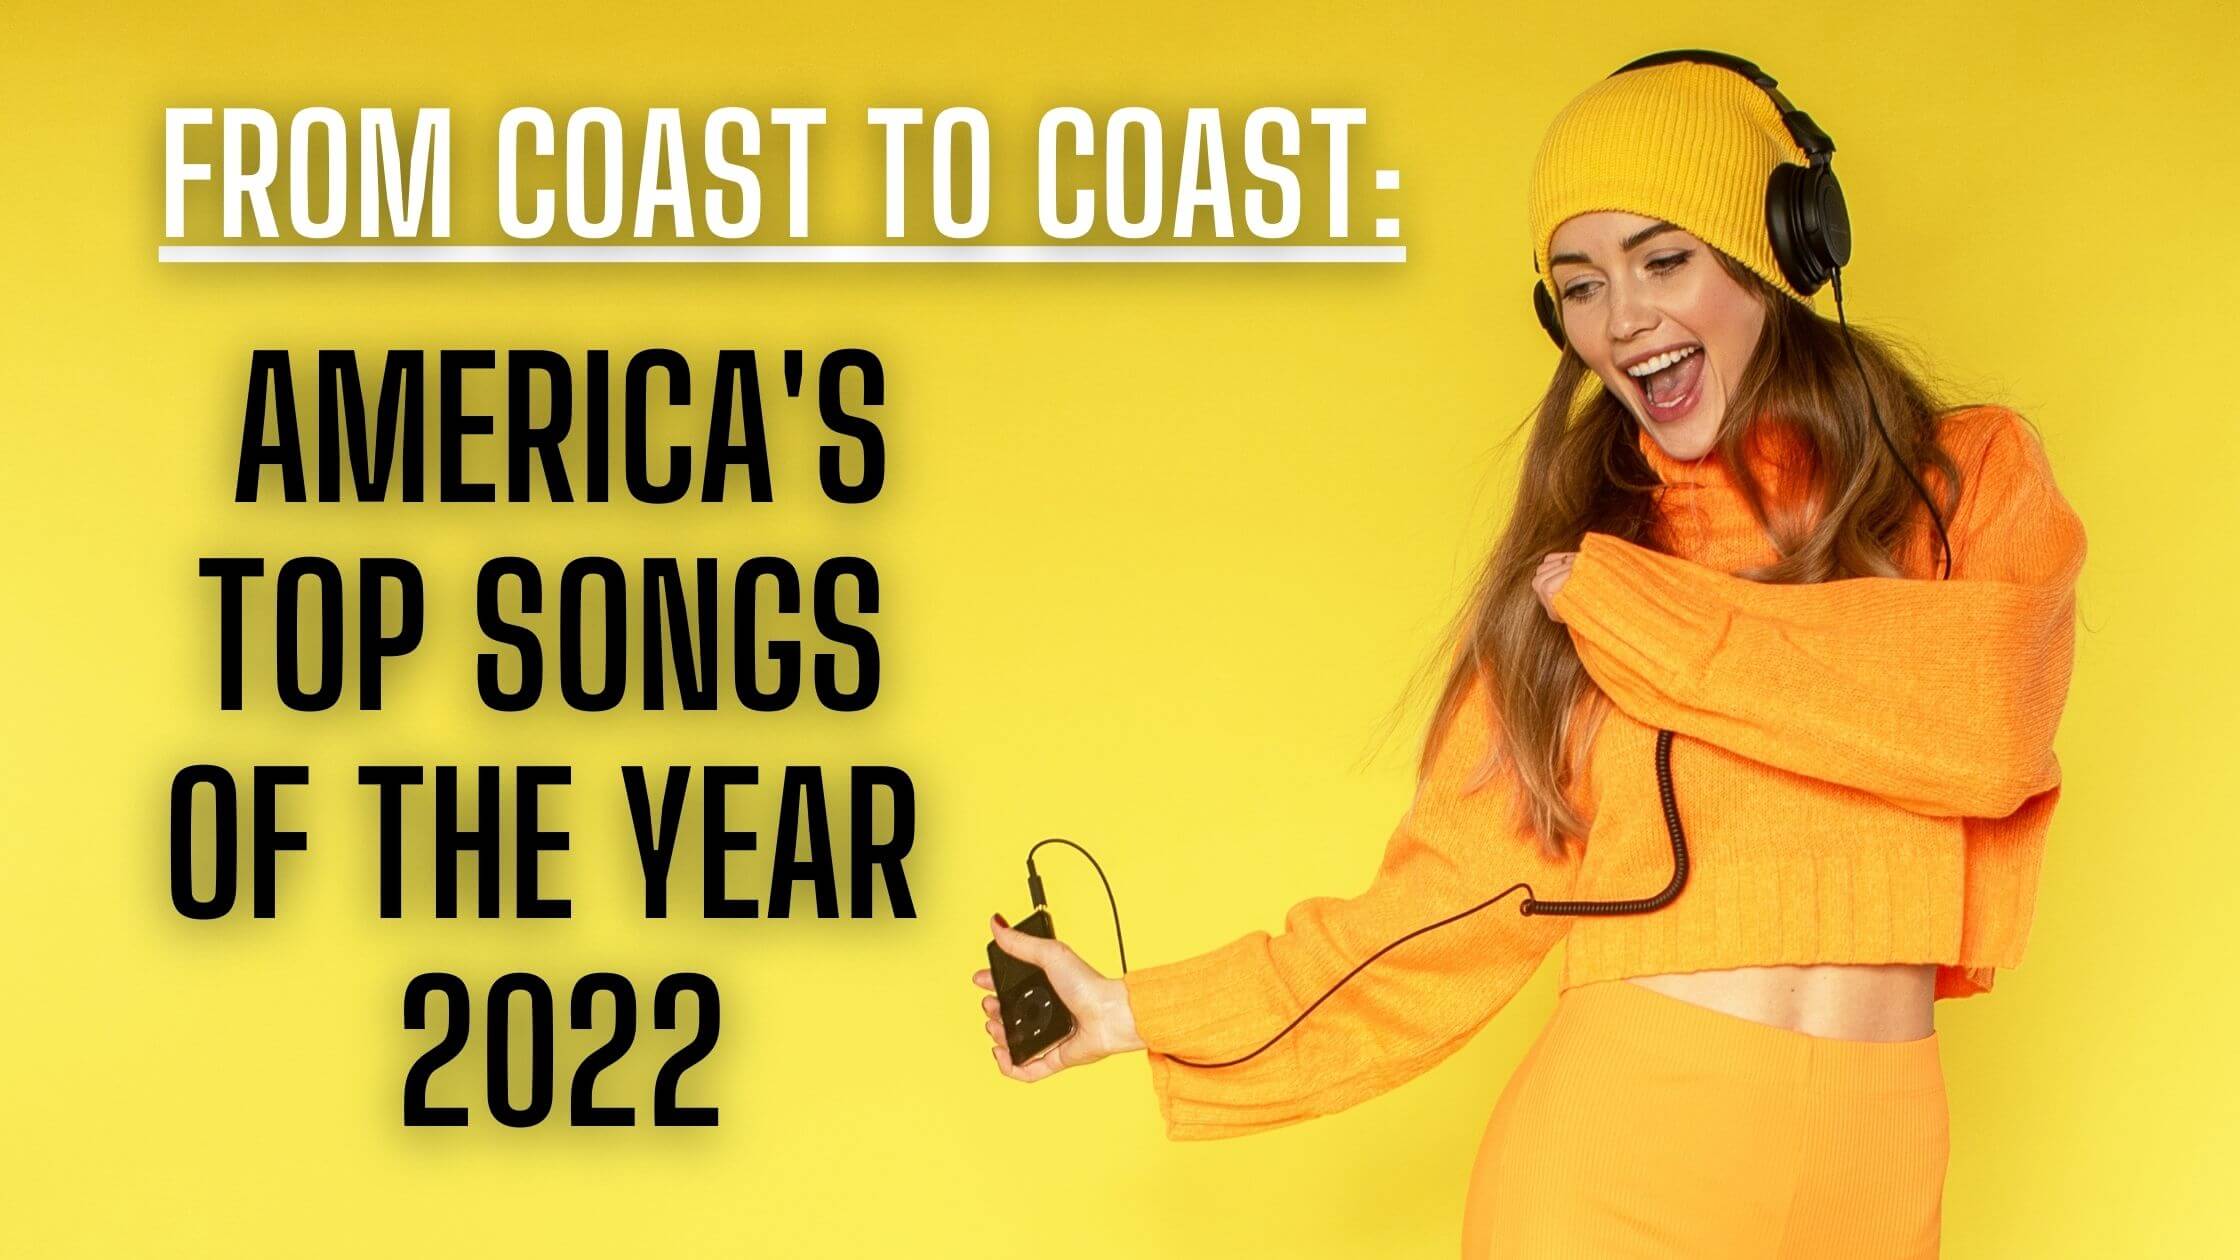 From Coast to Coast: America’s Top Songs of the Year 2022.